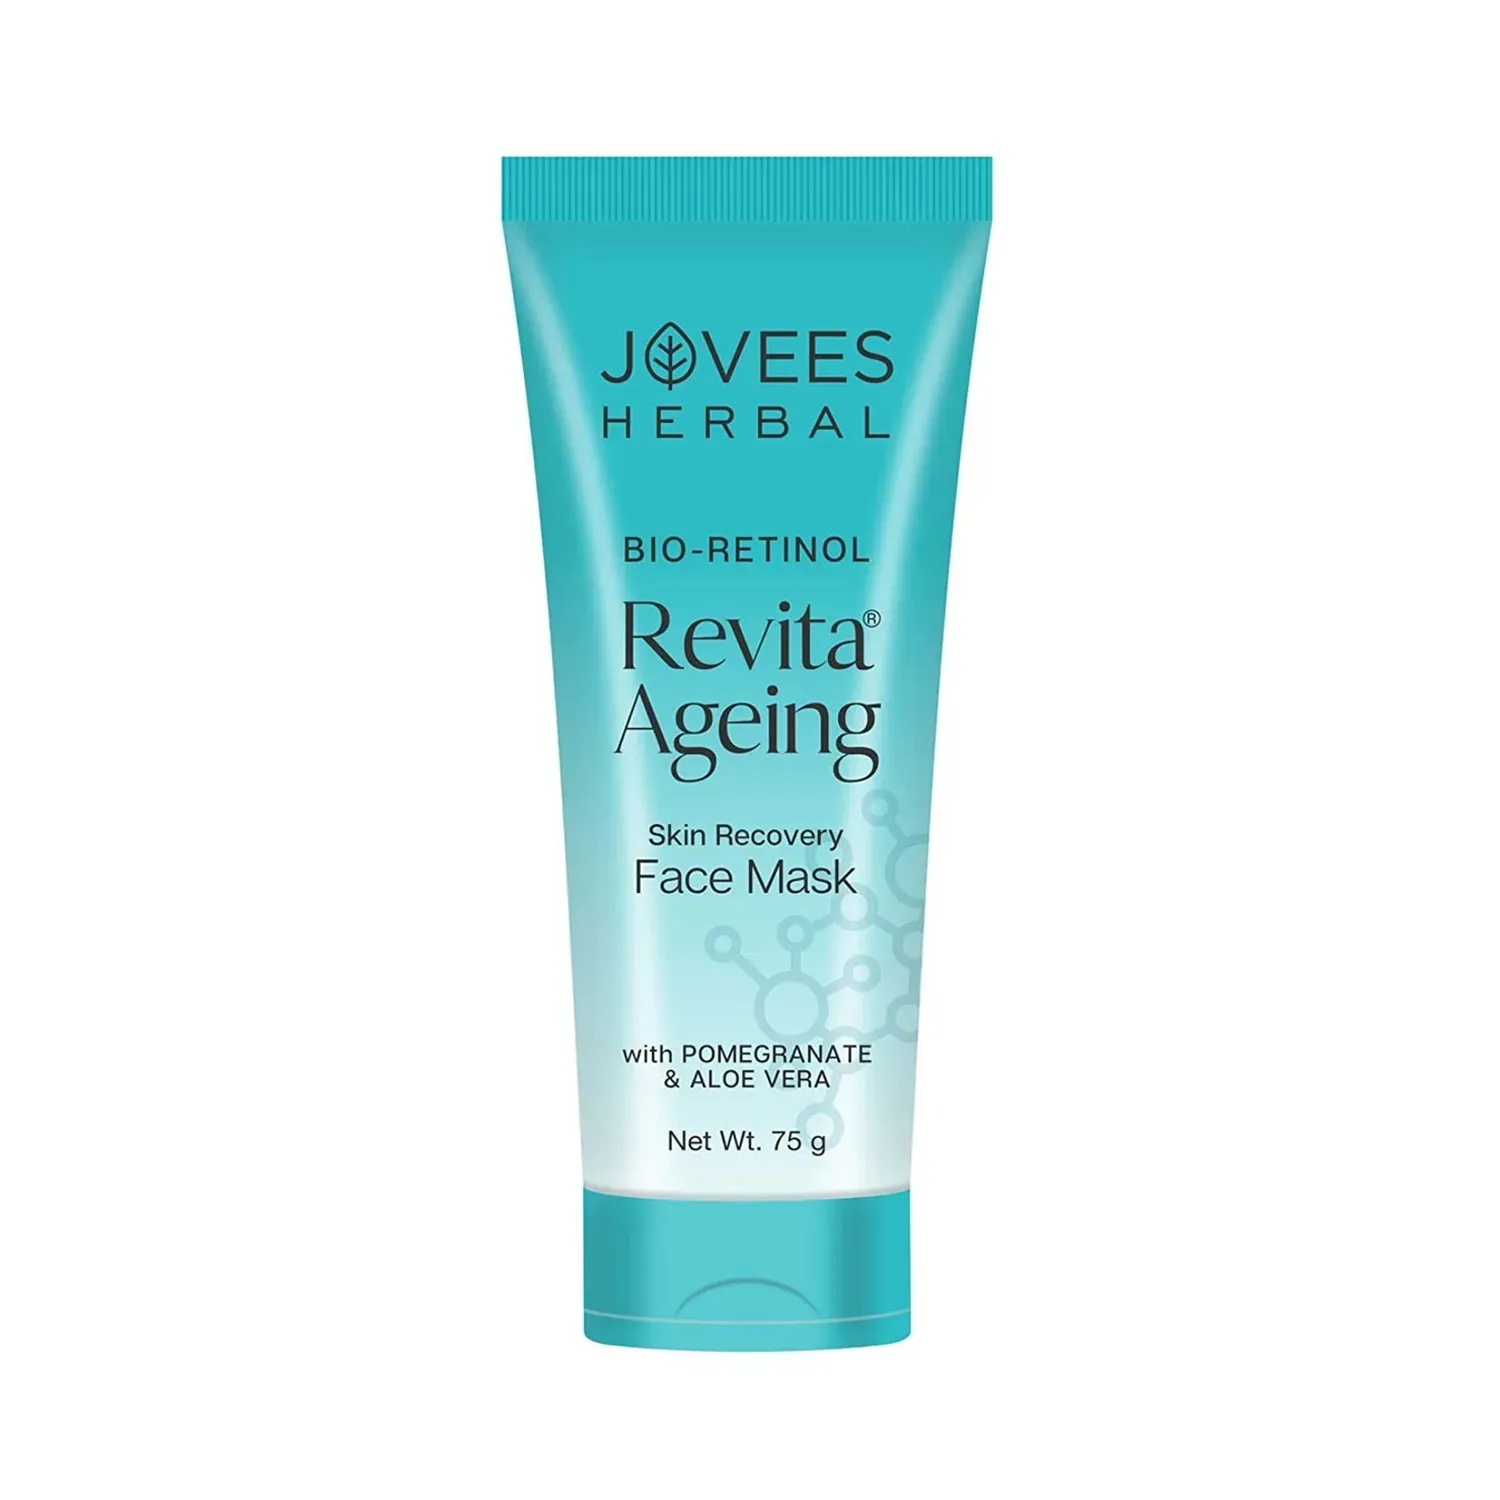 Jovees Herbal Revita Ageing Skin Recovery Face Mask (75g)